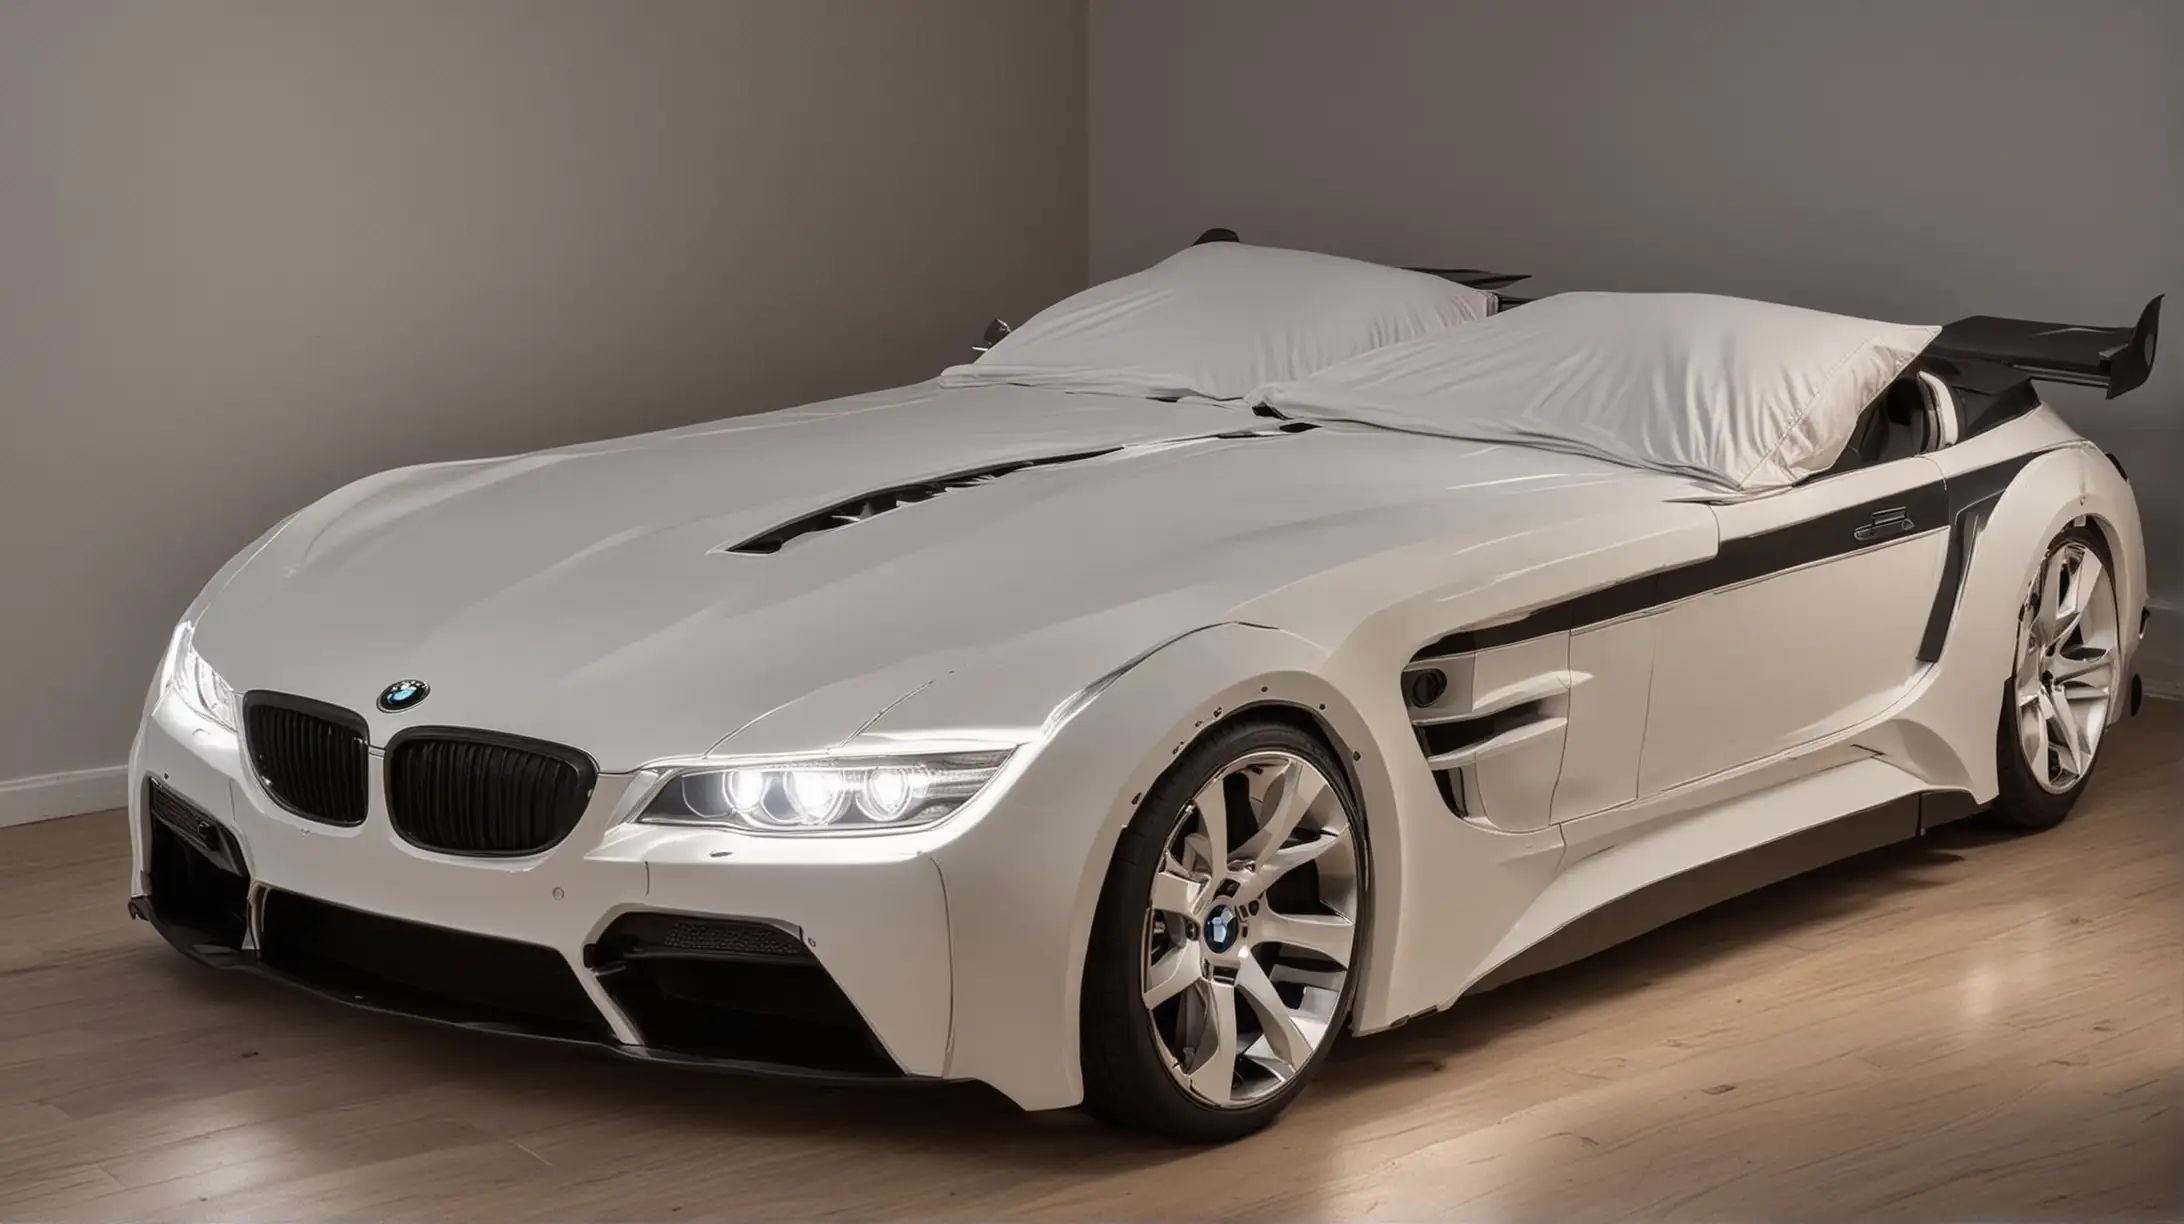 Luxurious Double Bed Shaped like a BMW Car with Headlights On